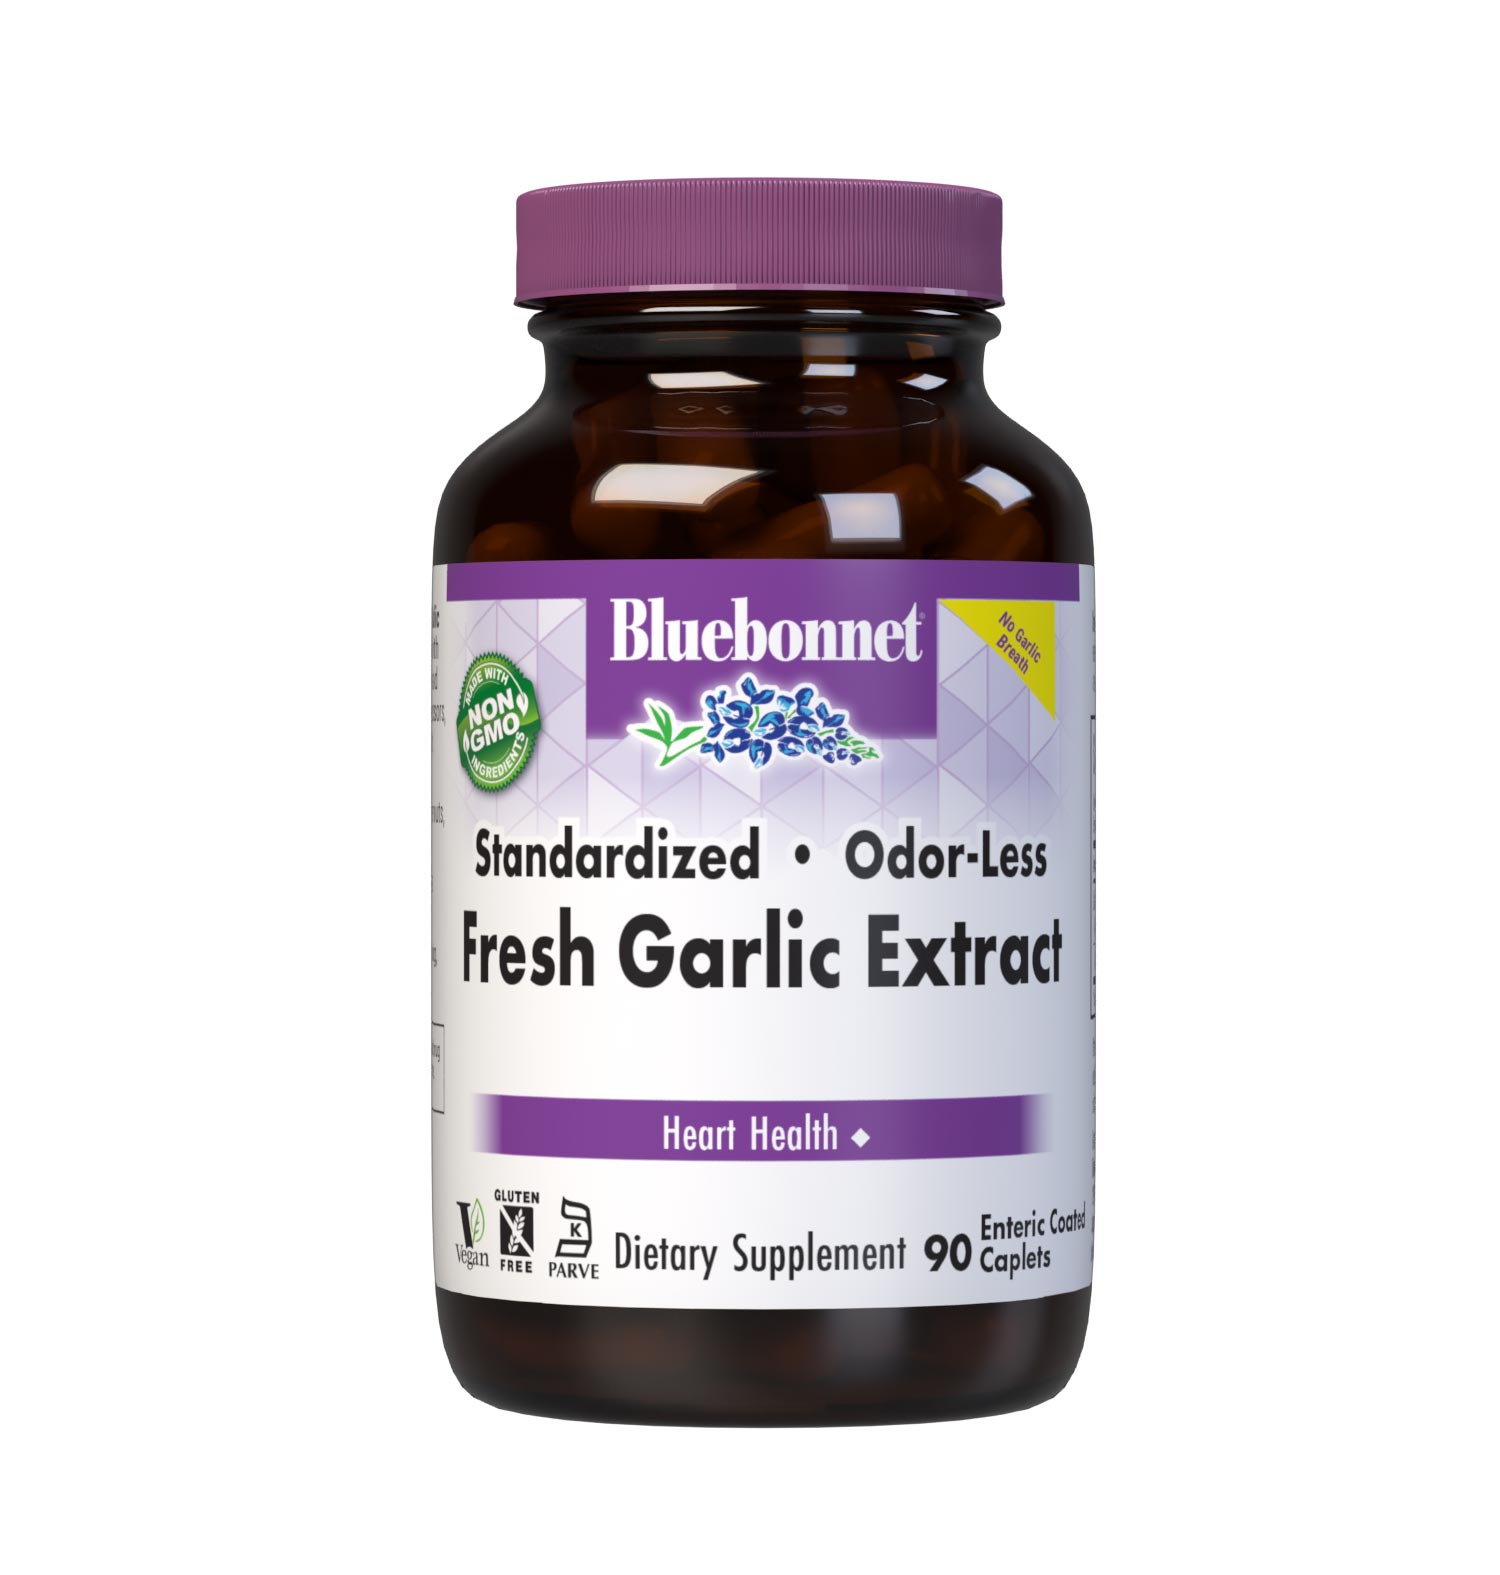 Bluebonnet’s Standardized Odor-Less Fresh Garlic Extract 90 Enteric Coated Caplets are formulated with fresh garlic extract from non-GMO garlic bulb and are standardized to yield allicin and allicin precursors, which are converted to allicin when ingested to support heart health. #size_90 count